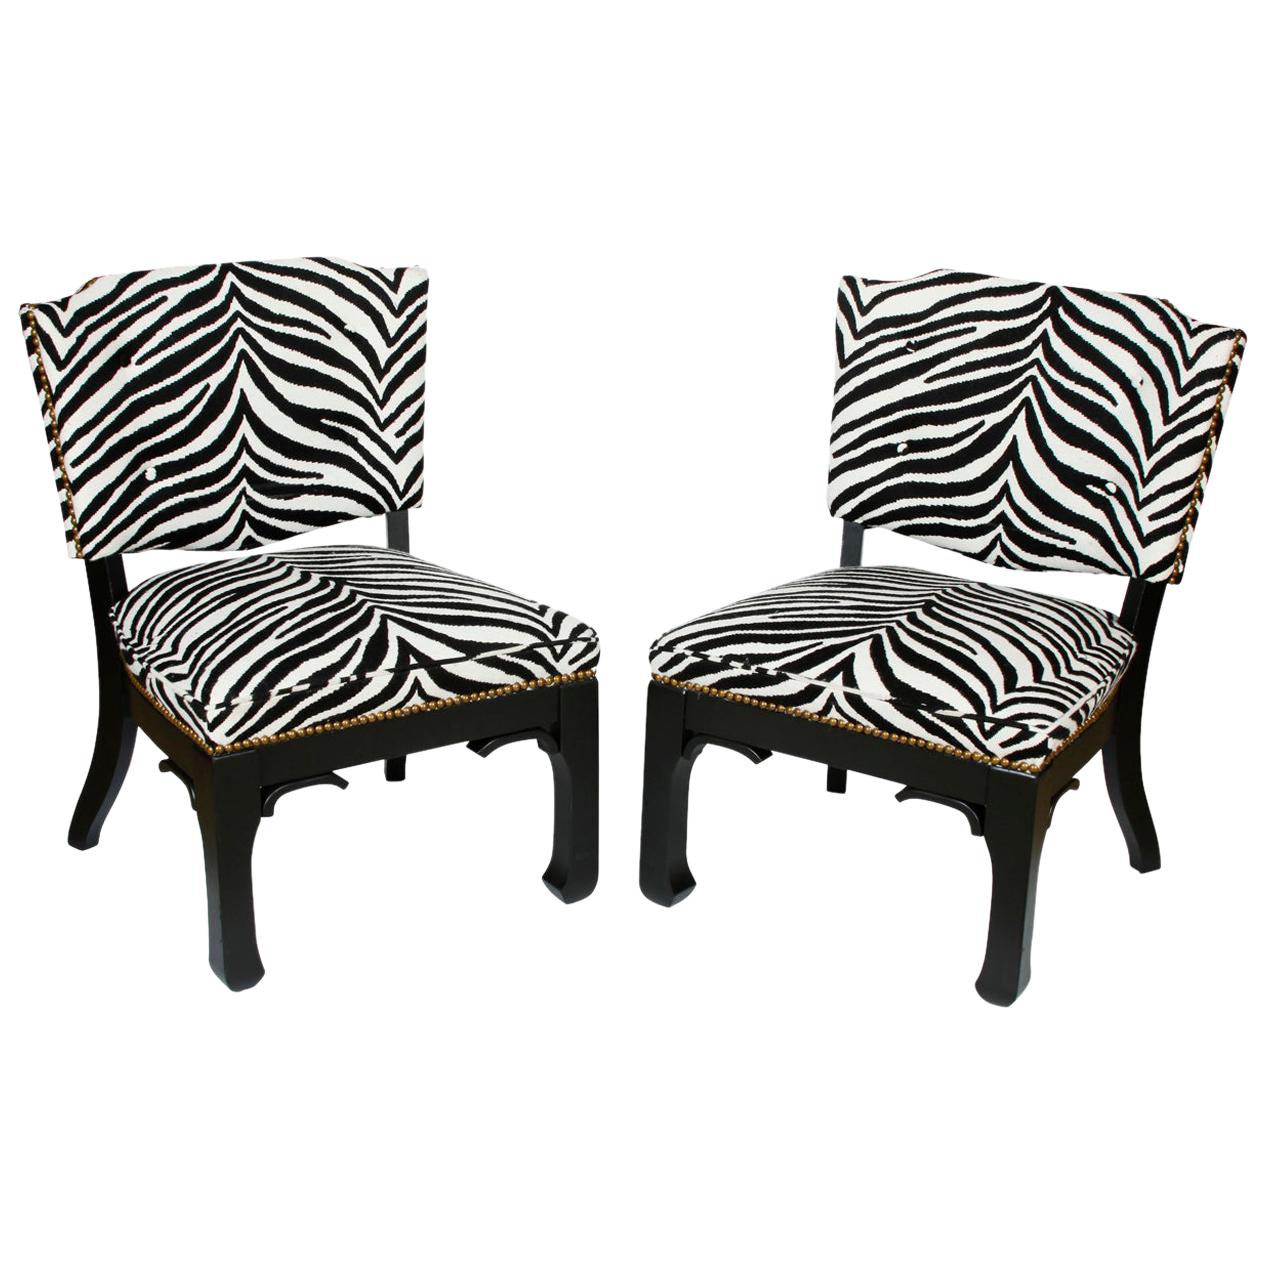 Pair of James Mont Black and White Zebra Chairs